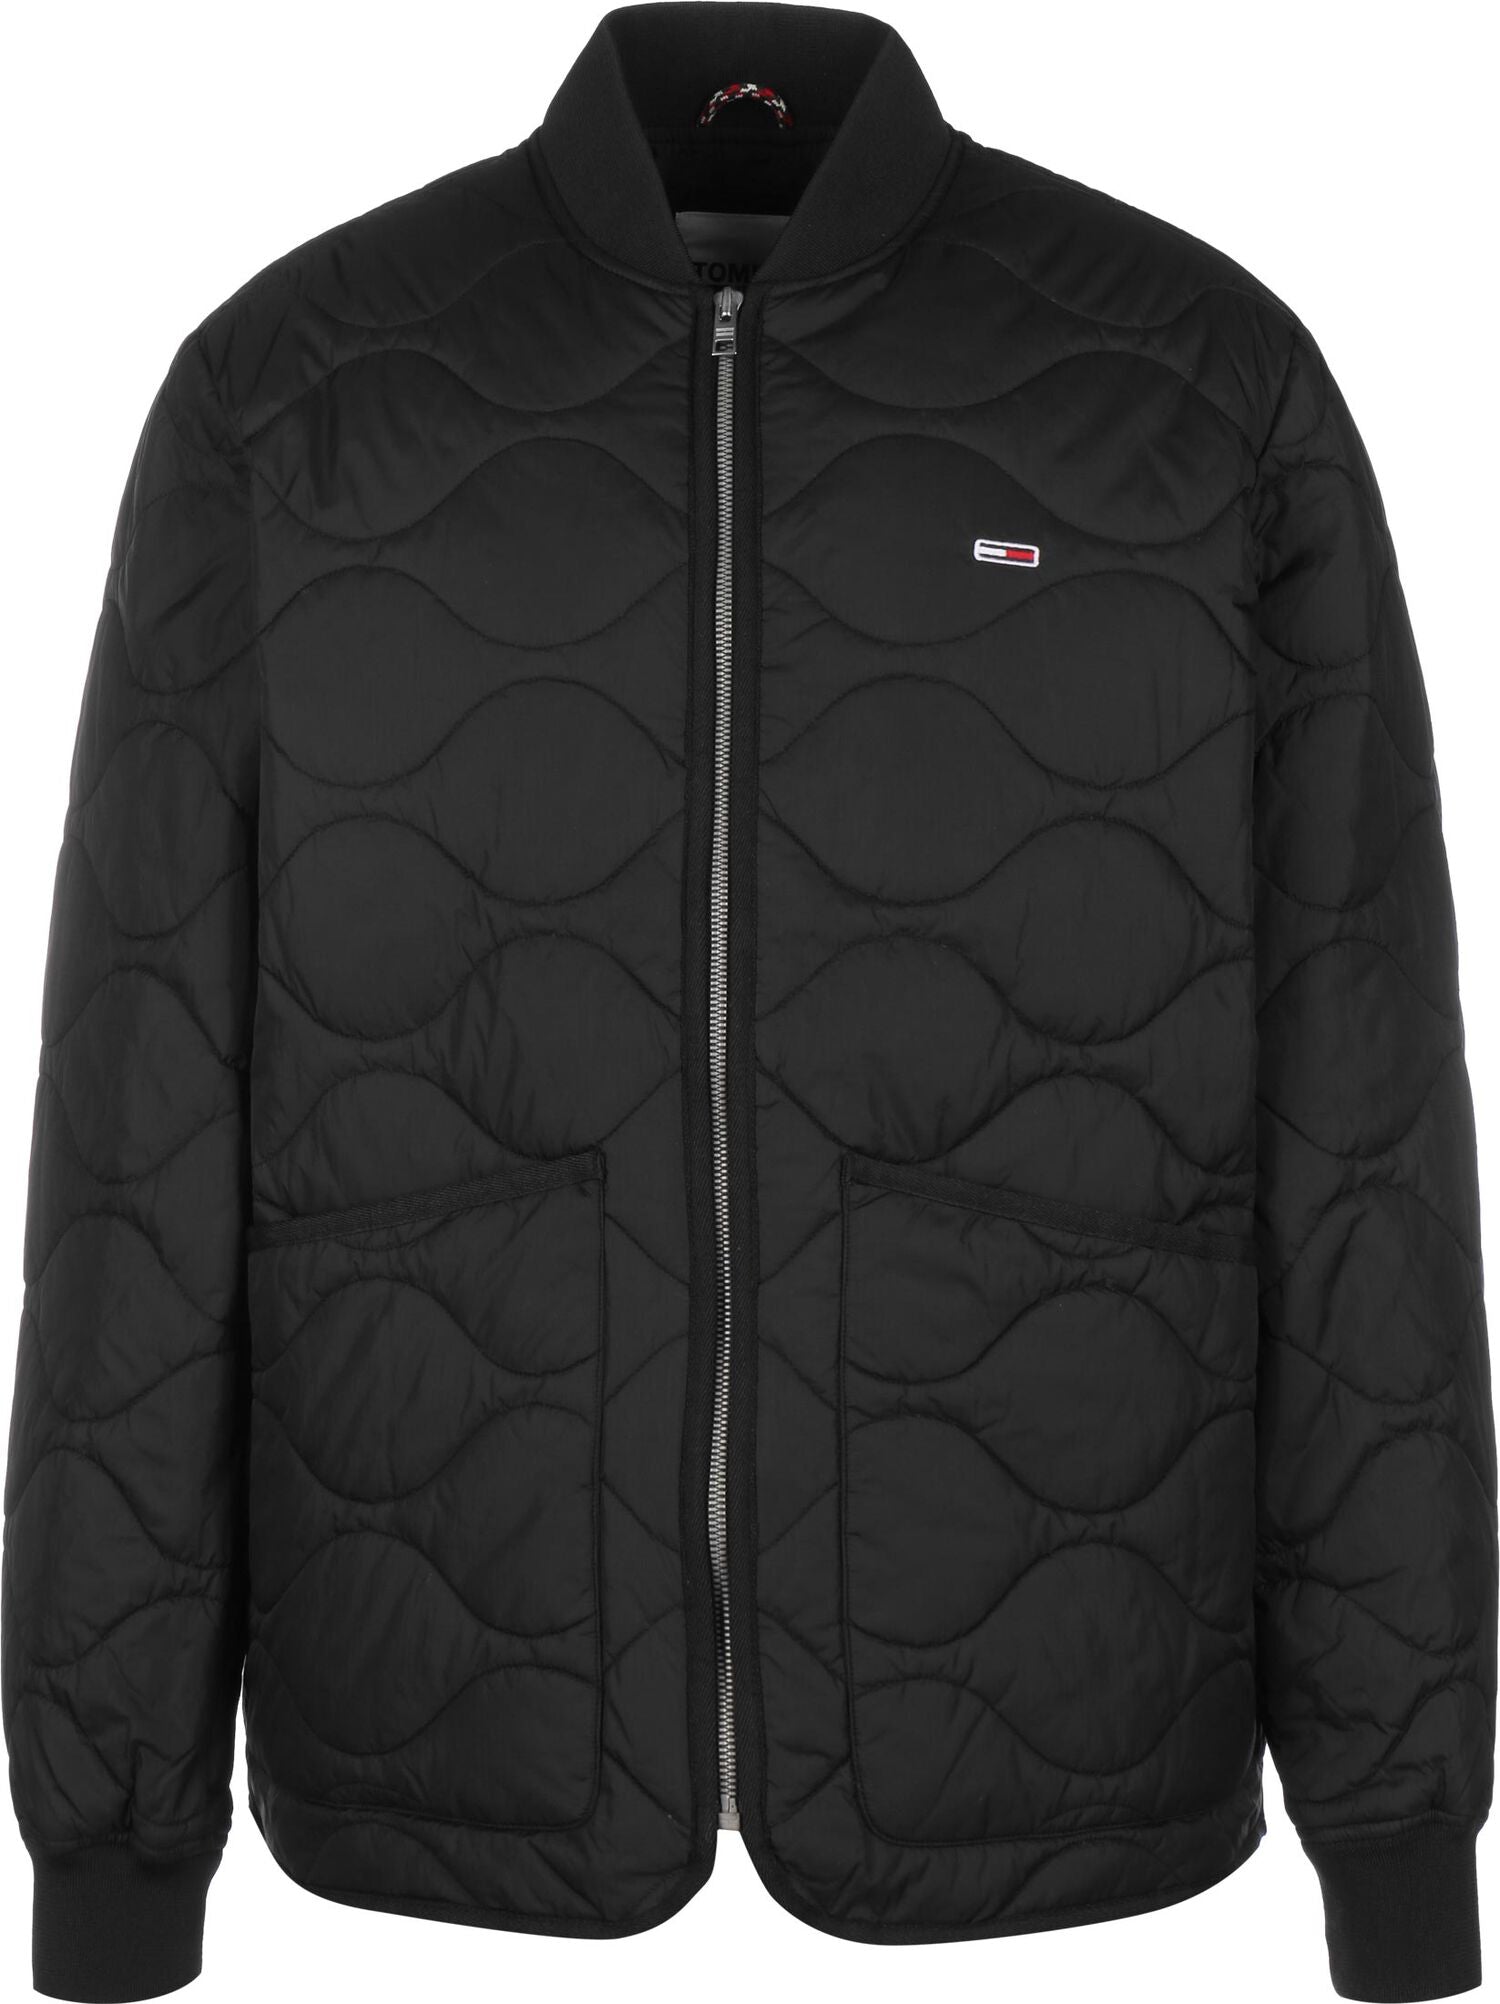 Tommy Jeans - Collegiate Quilted Jacket - Black